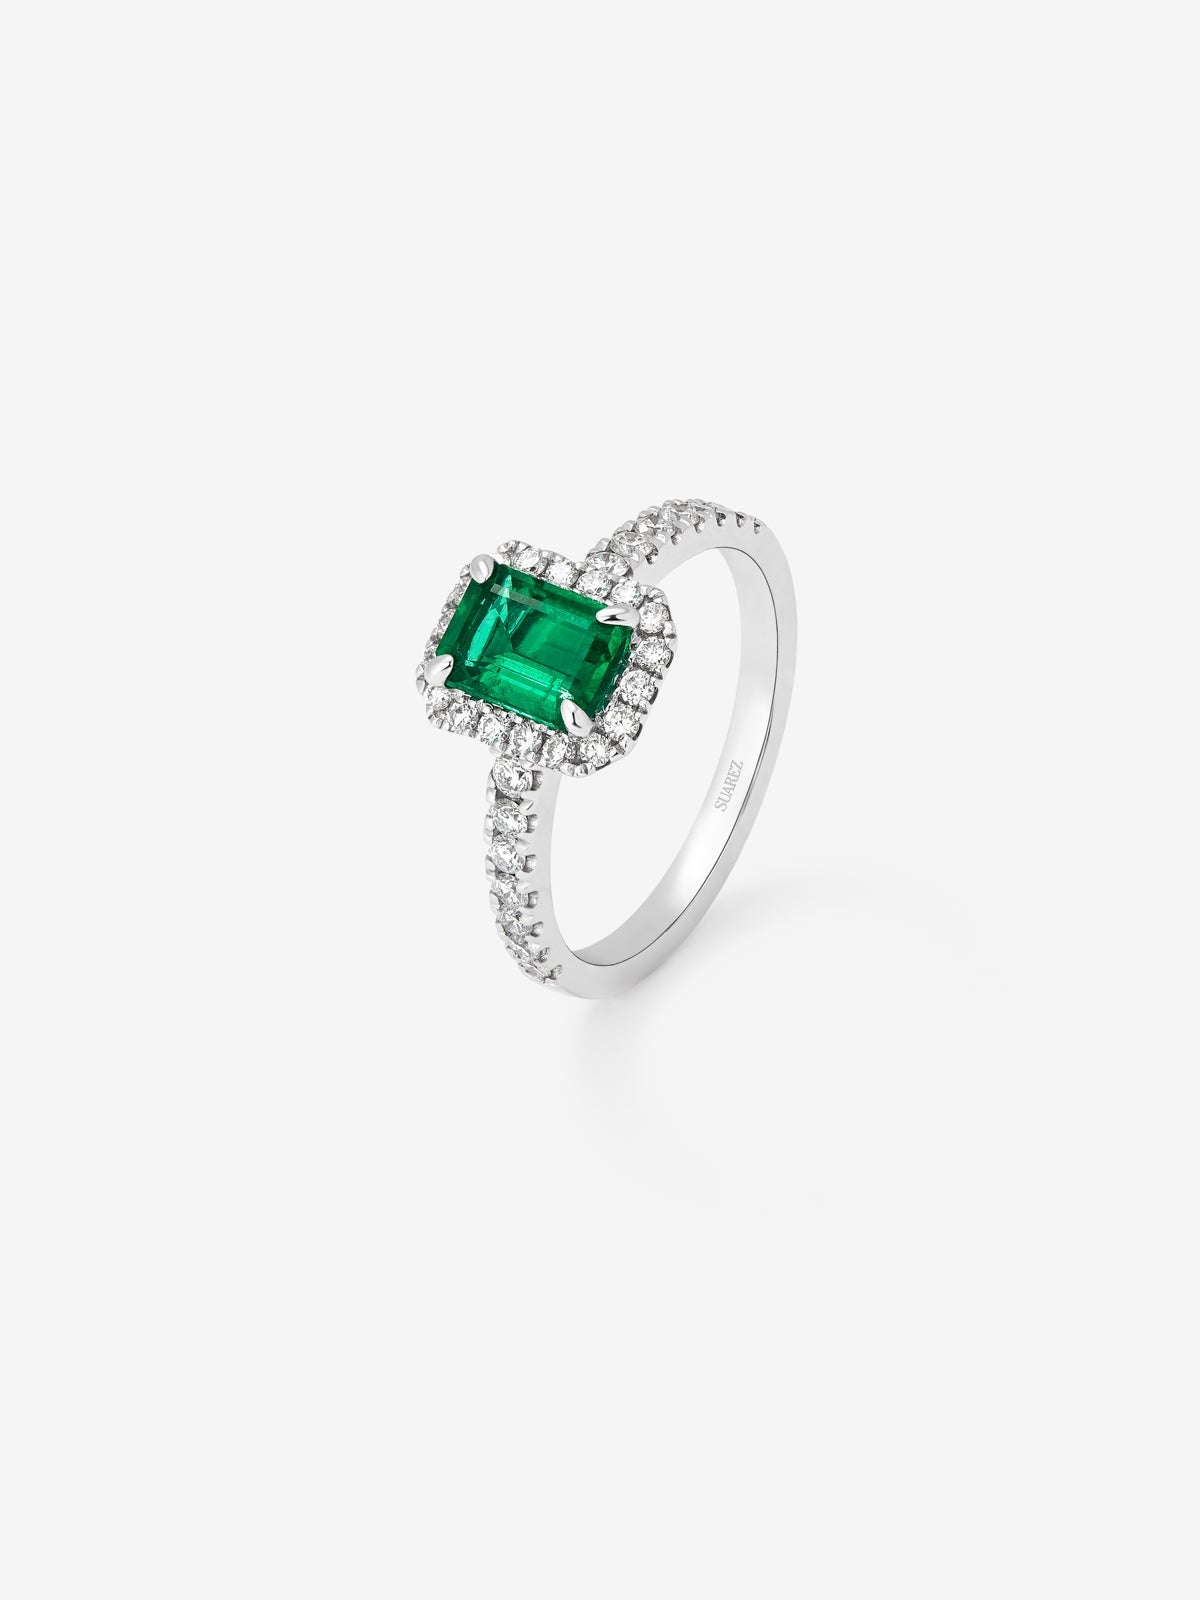 18K white gold ring with emerald cut emerald of 1.03 cts and border and arm of 32 brilliant cut diamonds with a total of 0.37 cts